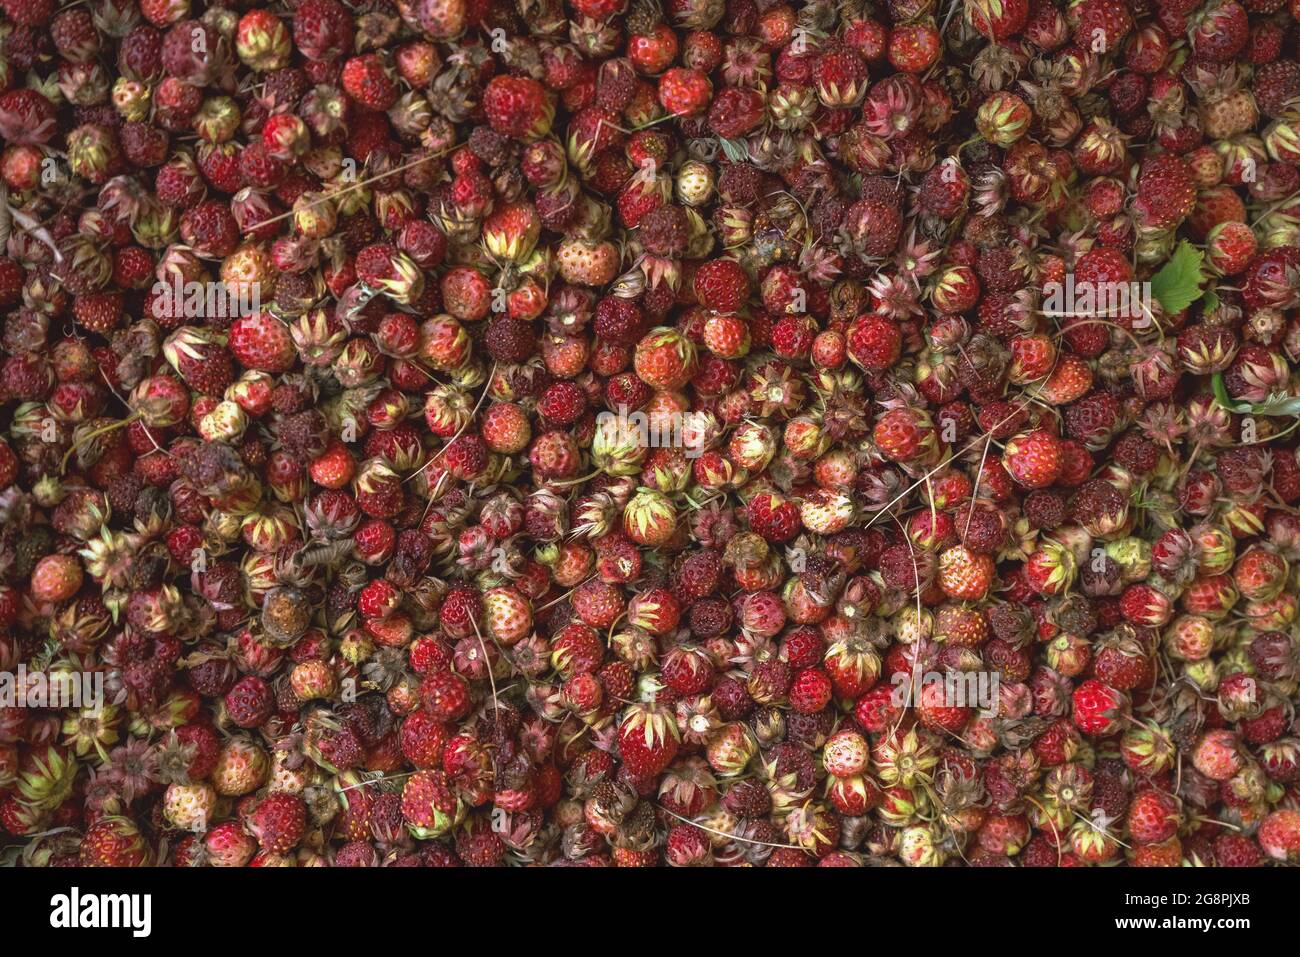 view from above on harvest of creamy strawberry or Fragaria viridis species of wild strawberry that grow in meadows or forest glades Stock Photo